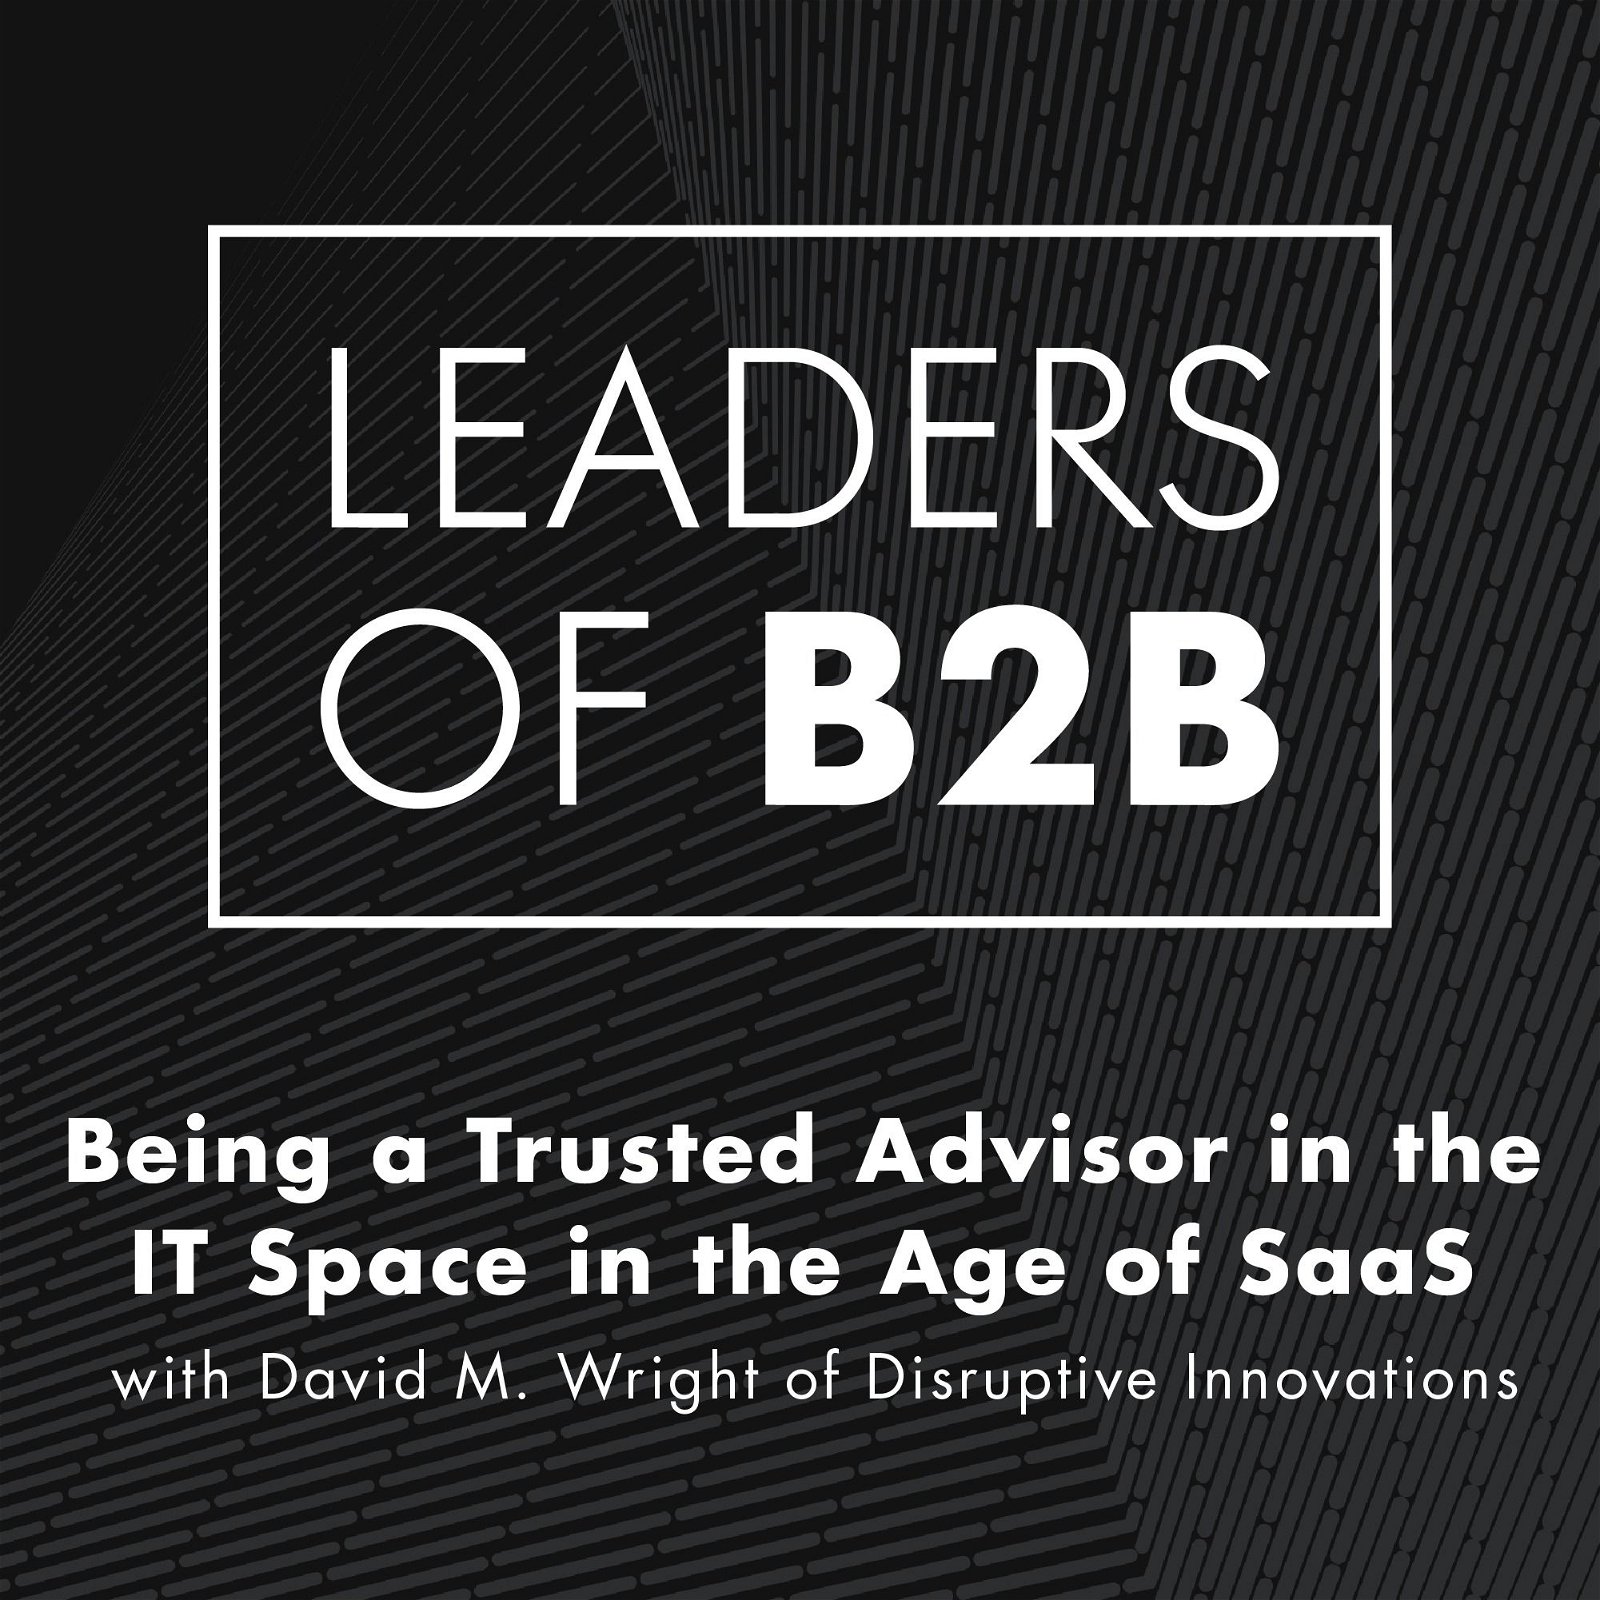 Being a Trusted Advisor in the IT Space in the Age of SaaS with David M. Wright of Disruptive Innovations